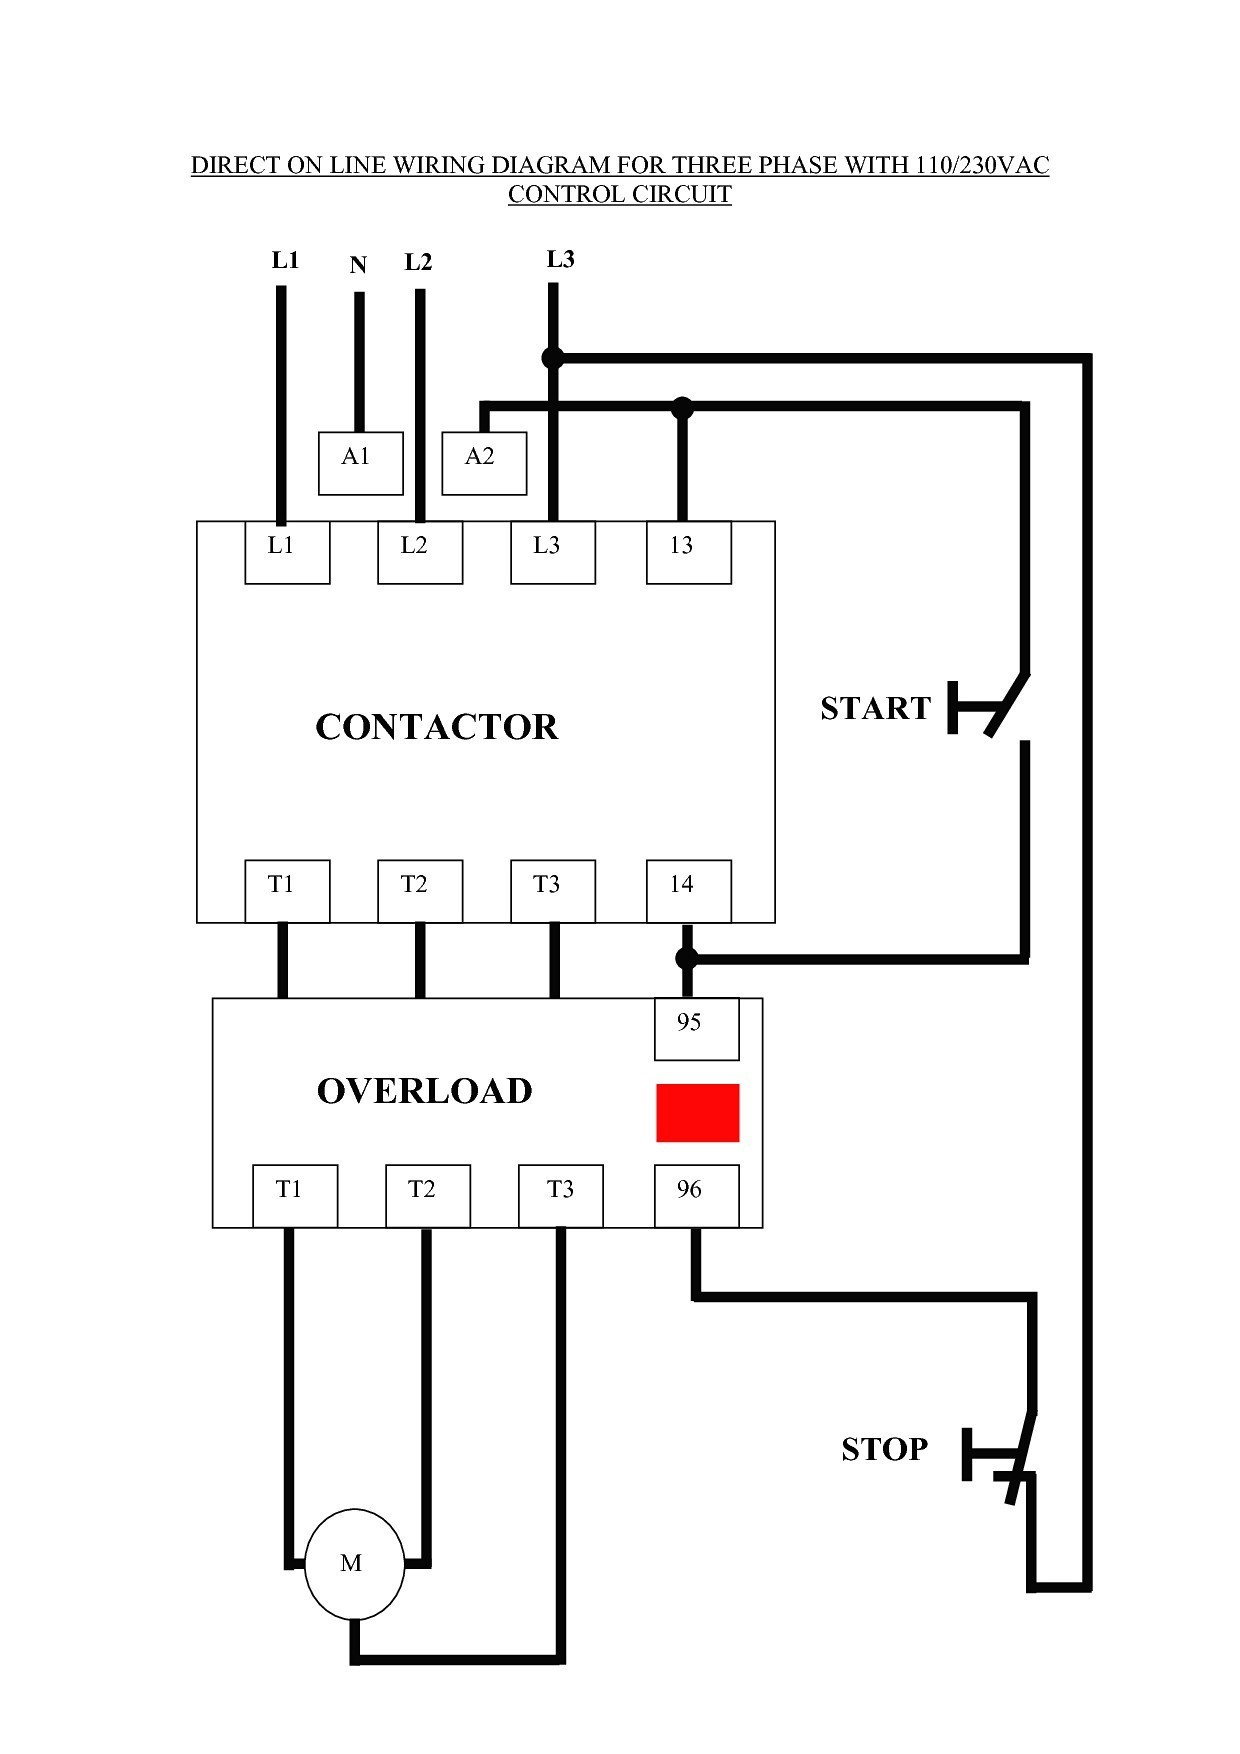 Square D Lighting Contactor Class 8903 Wiring Diagram | Wiring Diagram - Square D 8903 Lighting Contactor Wiring Diagram